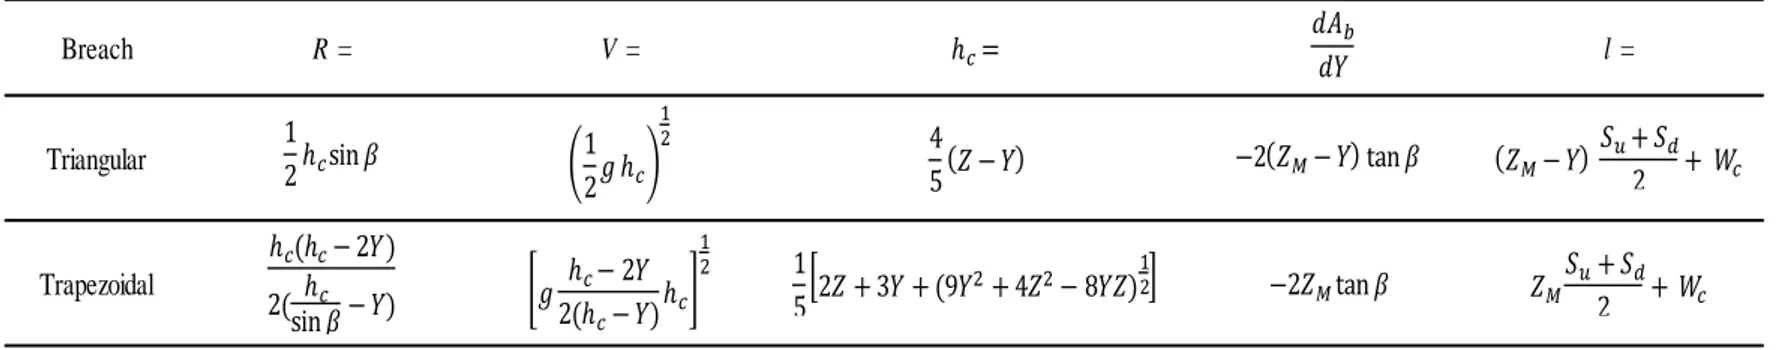 Table 1. Expressions for R, V, hc, dAb, dY, and l as Functions of Z and Y  Breach R  = V  = l  = Triangular Trapezoidal ℎ     